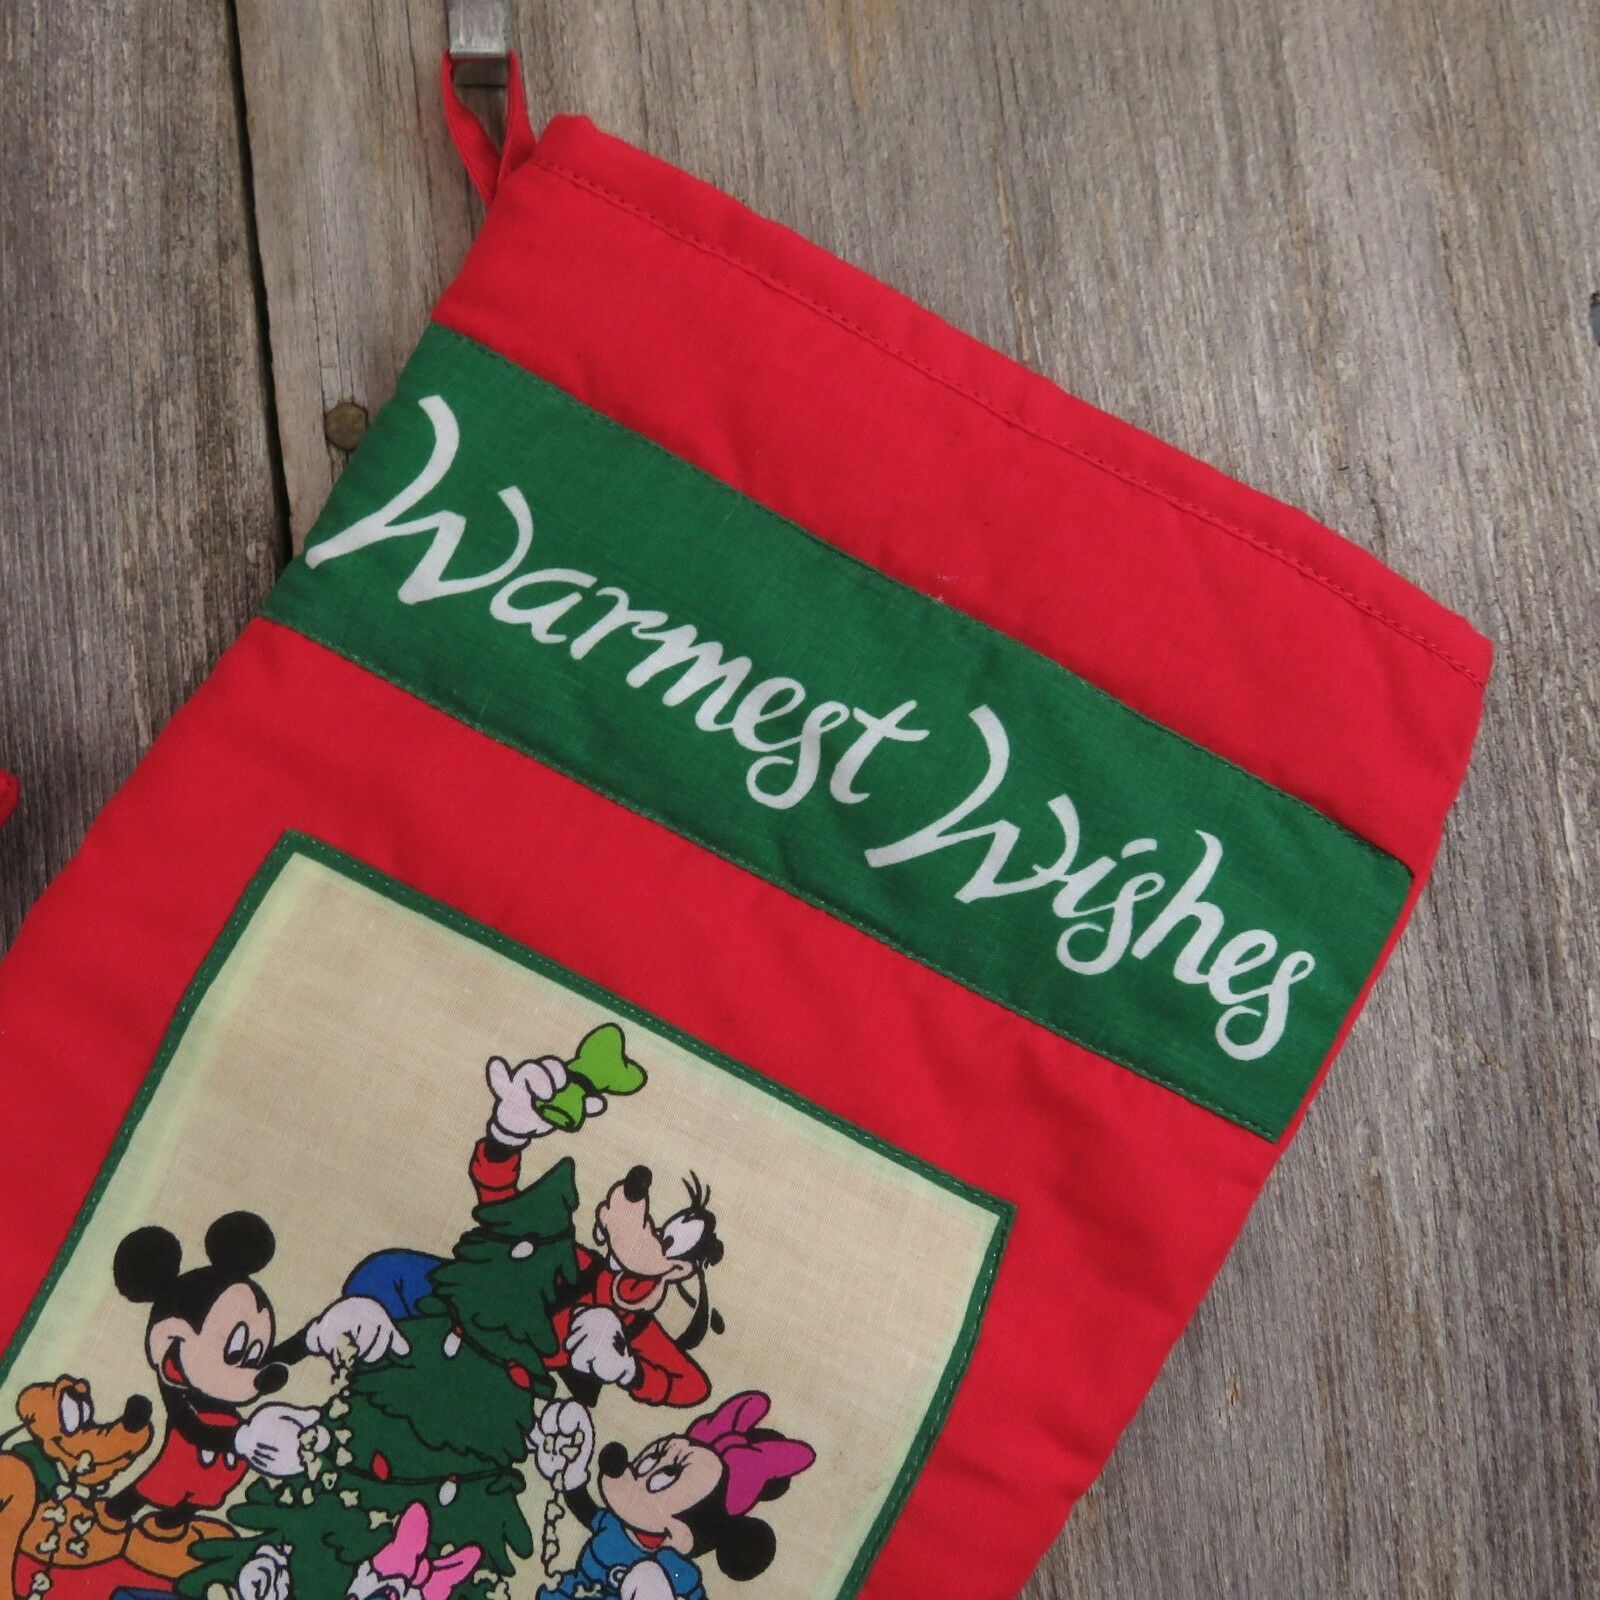 Disney Stocking Set Warmest Wishes Mickie Minnie Goofy Donald Daisy Duck Red - At Grandma's Table